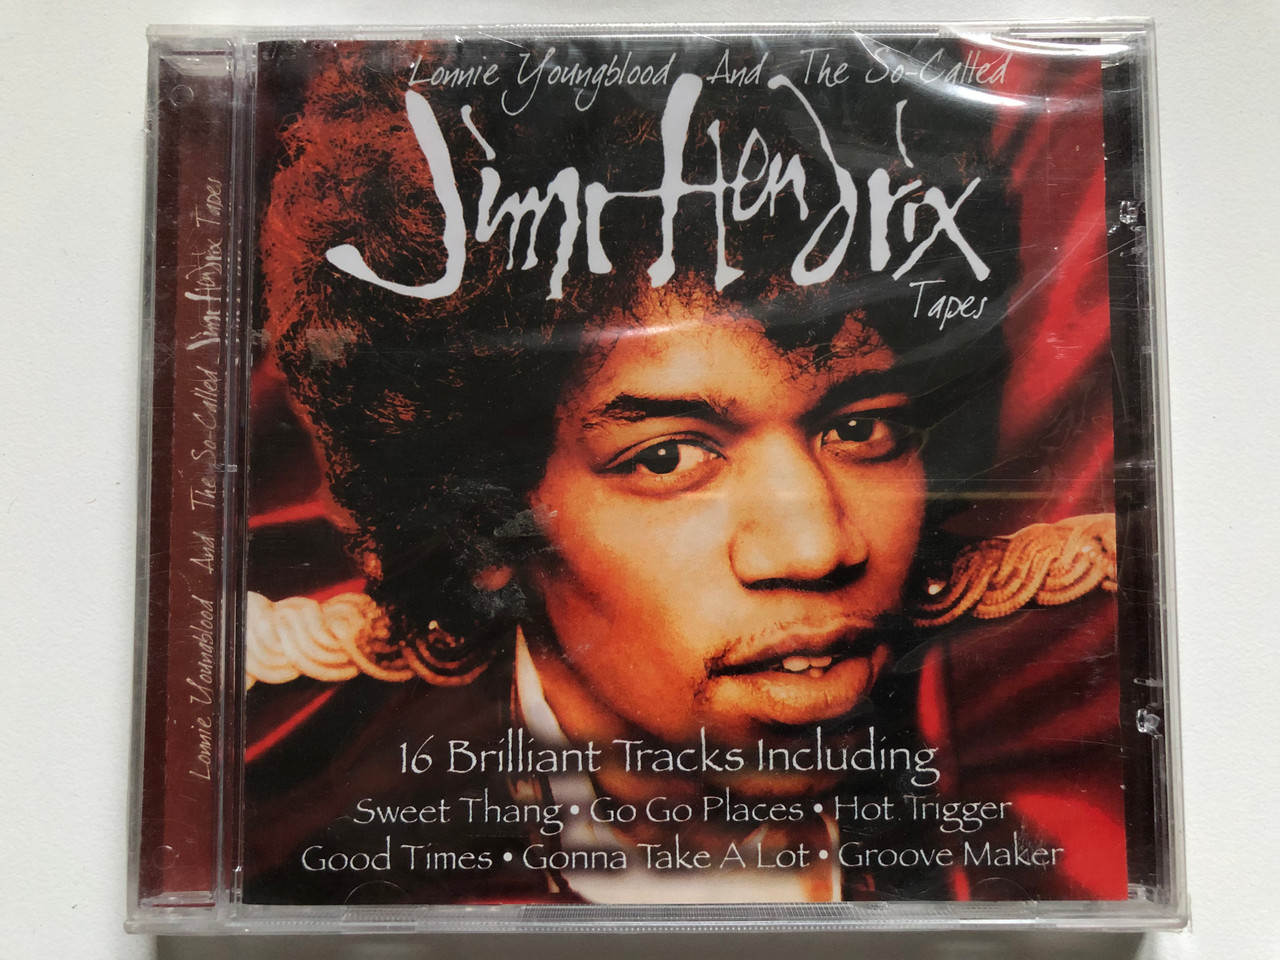 https://cdn10.bigcommerce.com/s-62bdpkt7pb/products/0/images/233123/Lonnie_Youngblood_And_The_So-Called_Jimi_Hendrix_Tapes_16_Brilliant_Tracks_Including_Sweet_Thang_Go_Go_Places_Hot_Trigger_Good_Times_Gonna_Take_A_Lot_Groove_Maker_Musicbank_Audio_CD_200_1__82233.1654798286.1280.1280.JPG?c=2&_gl=1*s8nyid*_ga*MjA2NTIxMjE2MC4xNTkwNTEyNTMy*_ga_WS2VZYPC6G*MTY1NDc5NTk2MS40MjcuMS4xNjU0Nzk4MDc0LjU2